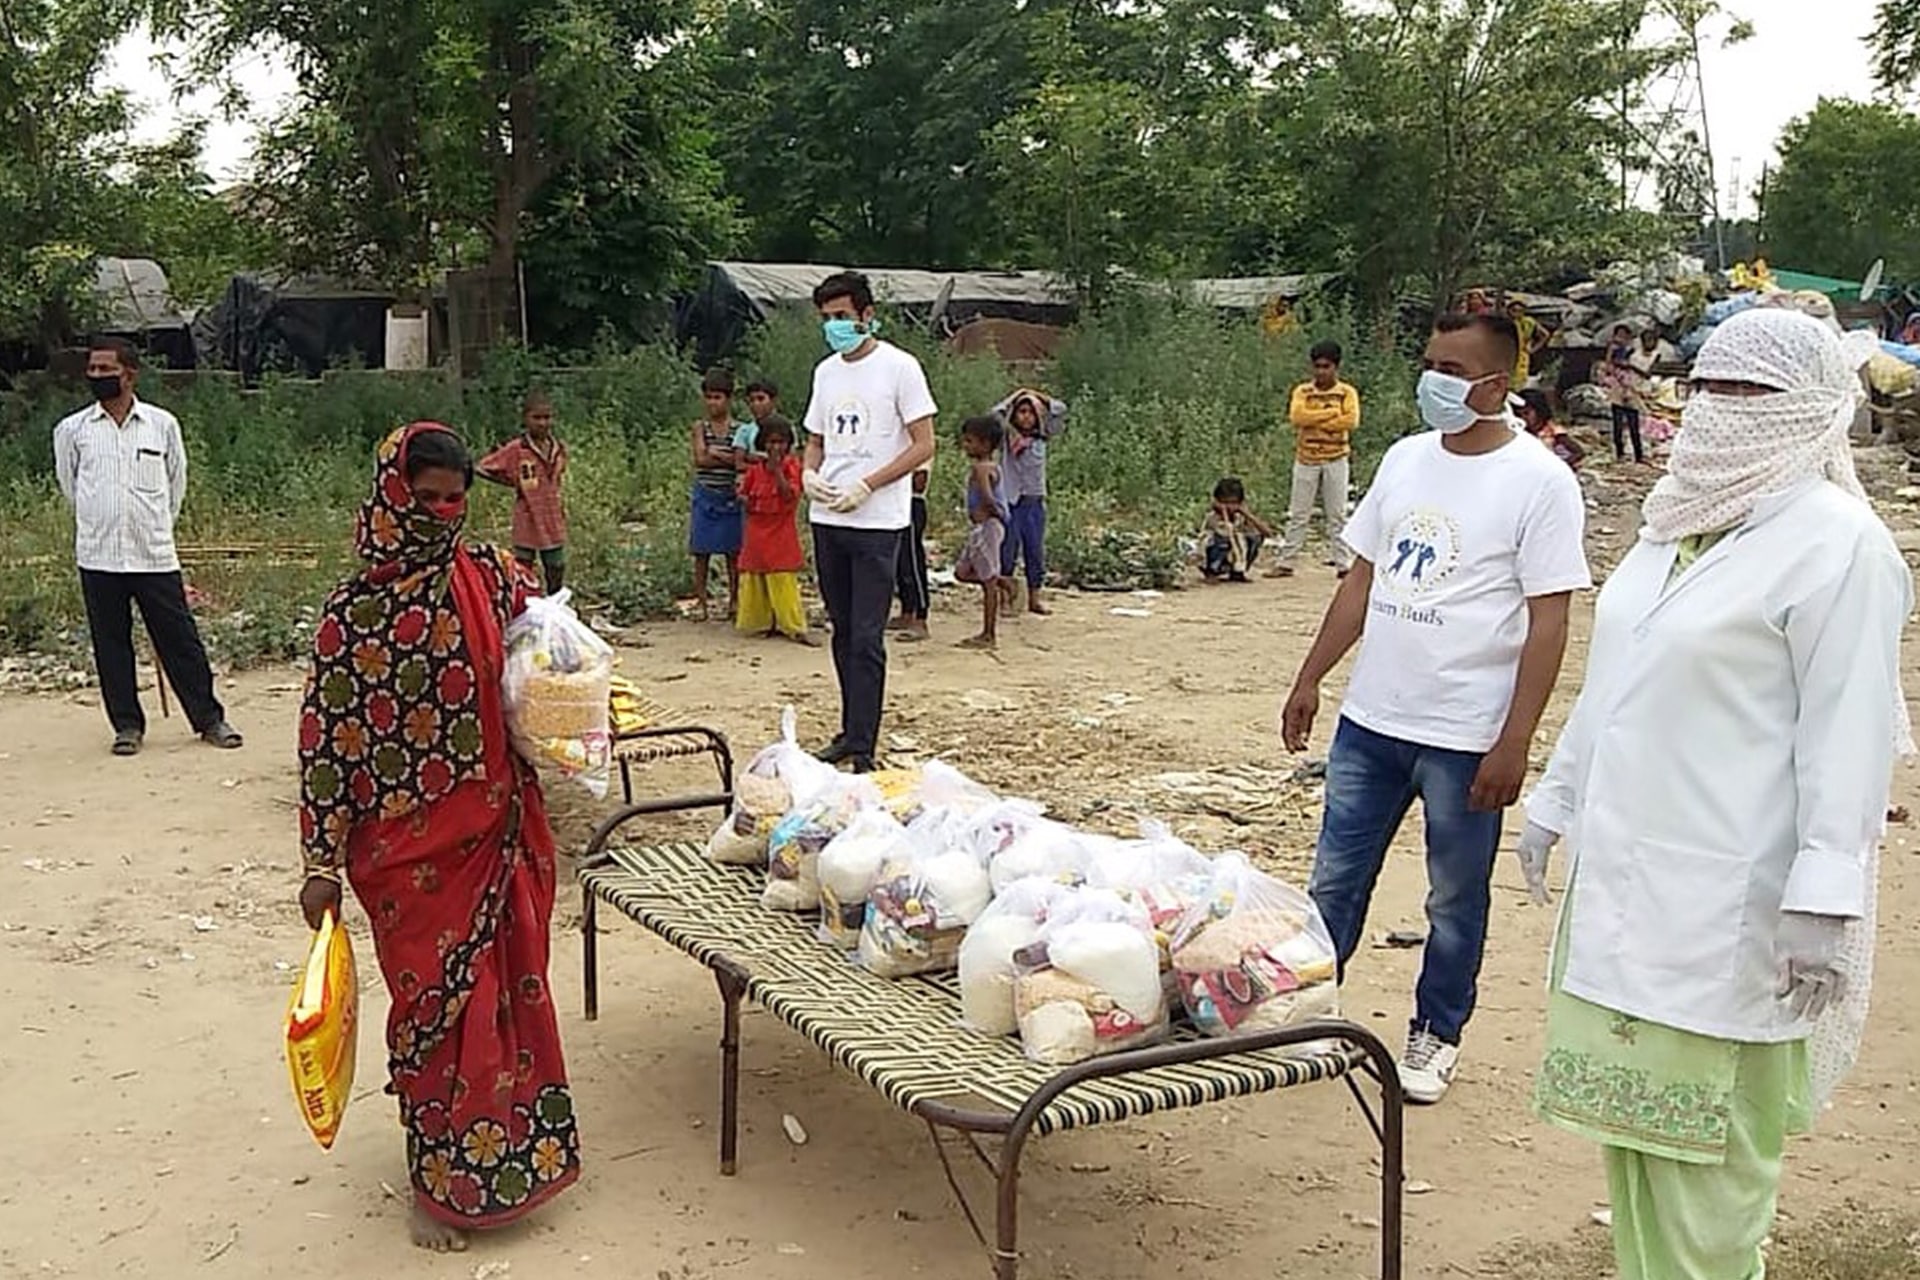 Support during Covid 19: Serving Poor families of Ragpickers